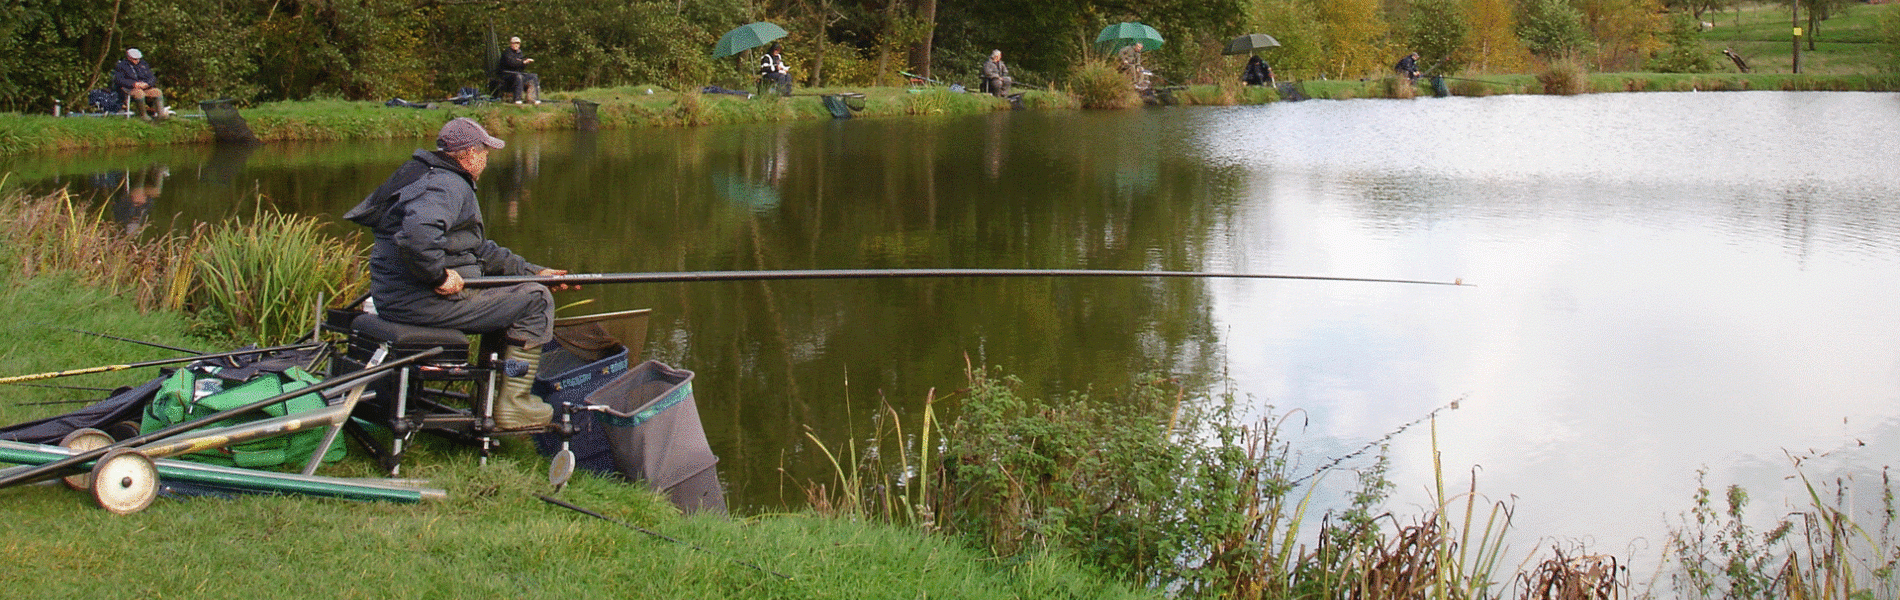 Fishing in the countryside at Haye Farm holiday accommodation